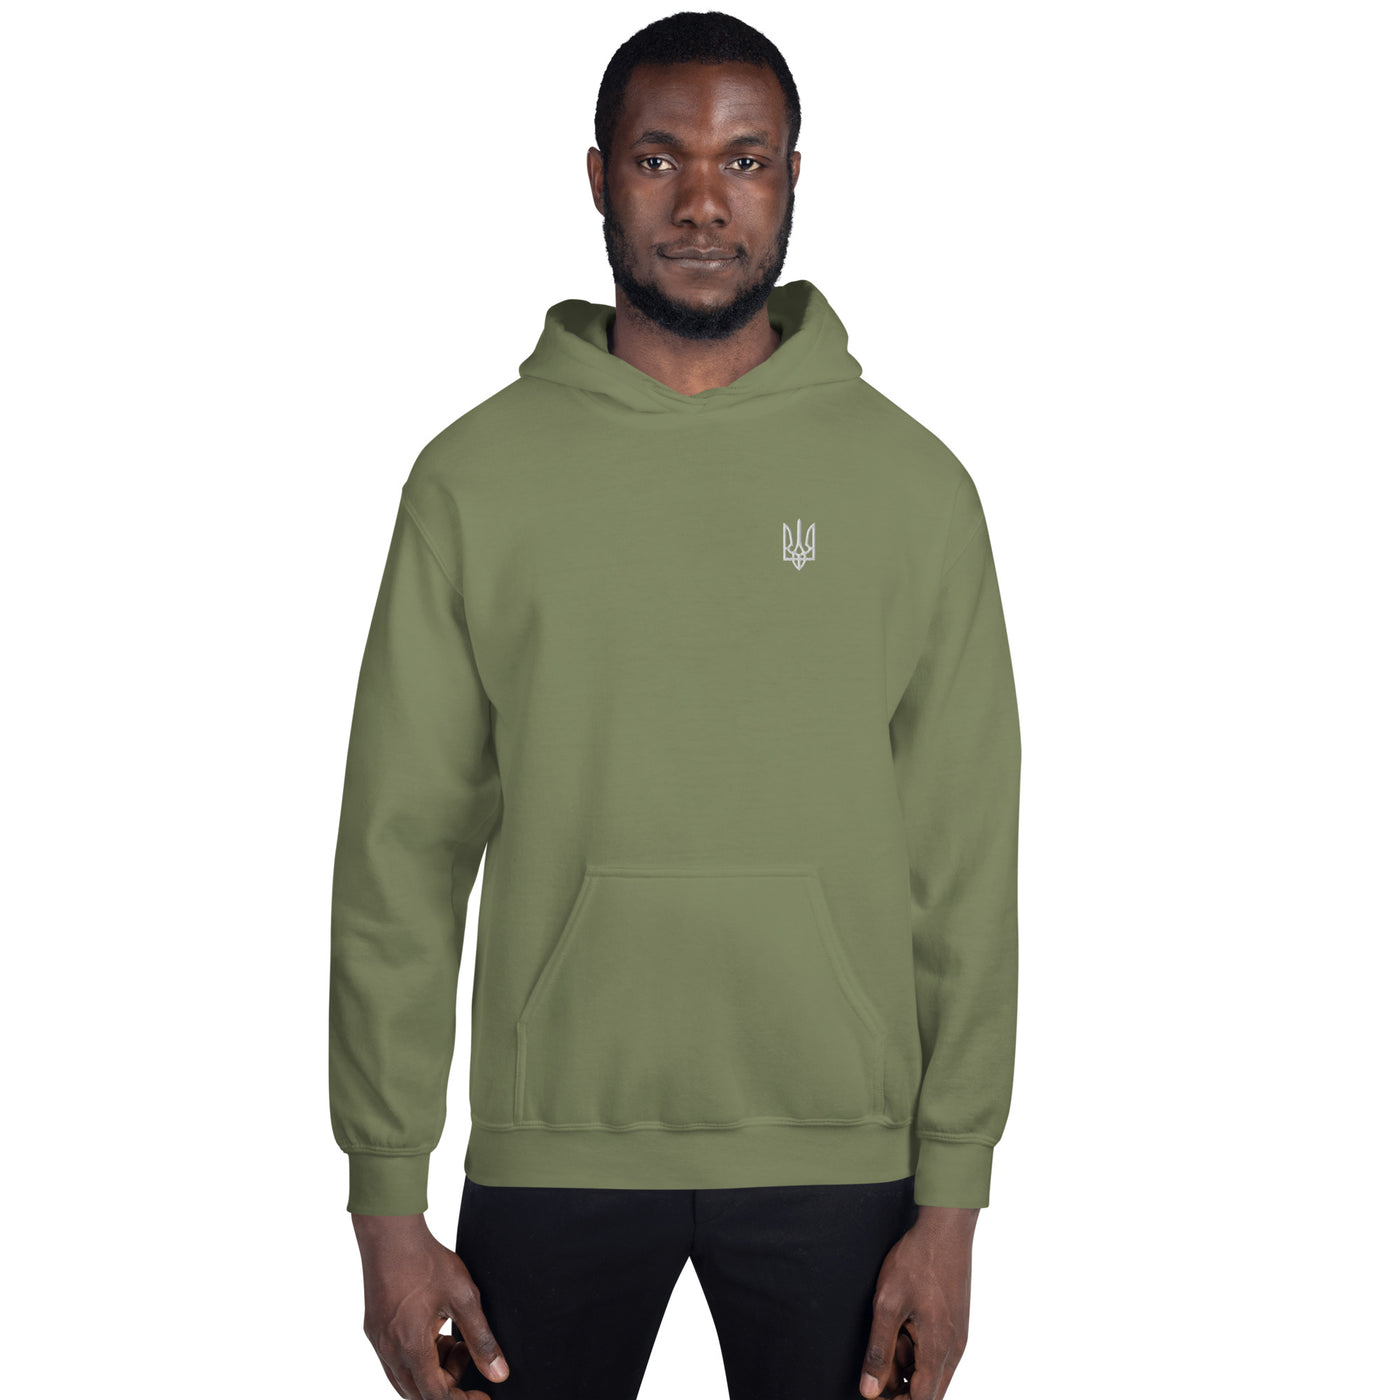 Trident of Freedom Heavy Blend Hoodie Embroidery